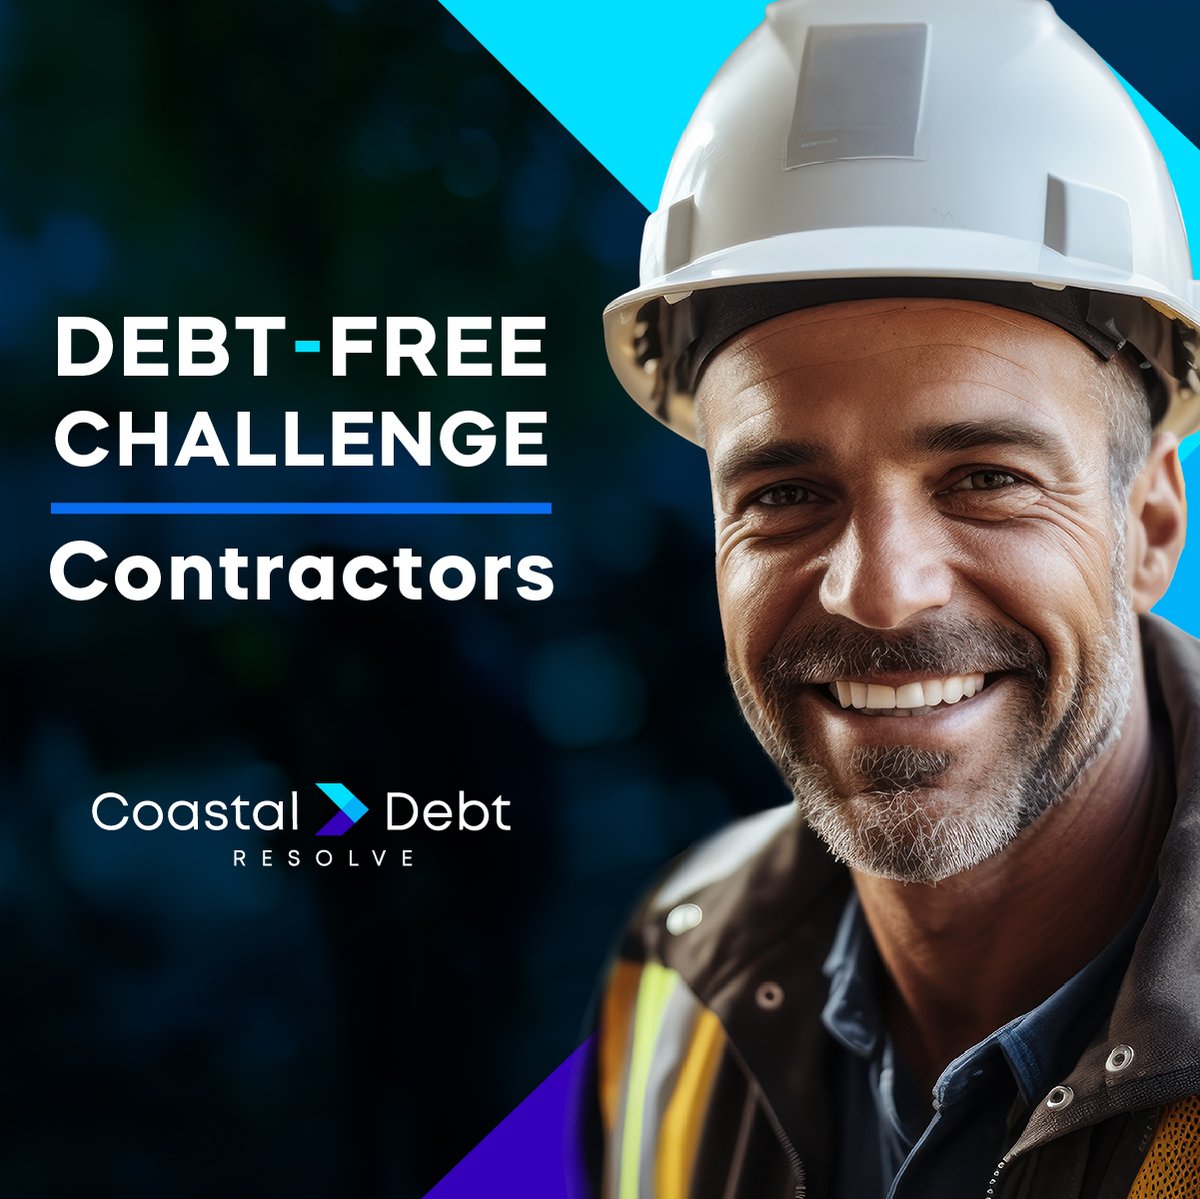 #Contracting #BusinessOwners If your #business is struggling with #MerchantCashAdvance, we bring you a 4-step guide to get you out of #Debt in 6 to 8 months! 

You can #Readmore by visiting hubs.li/Q02sDlyN0

#BusinessDebt #MCADebt #MCA #Contractors